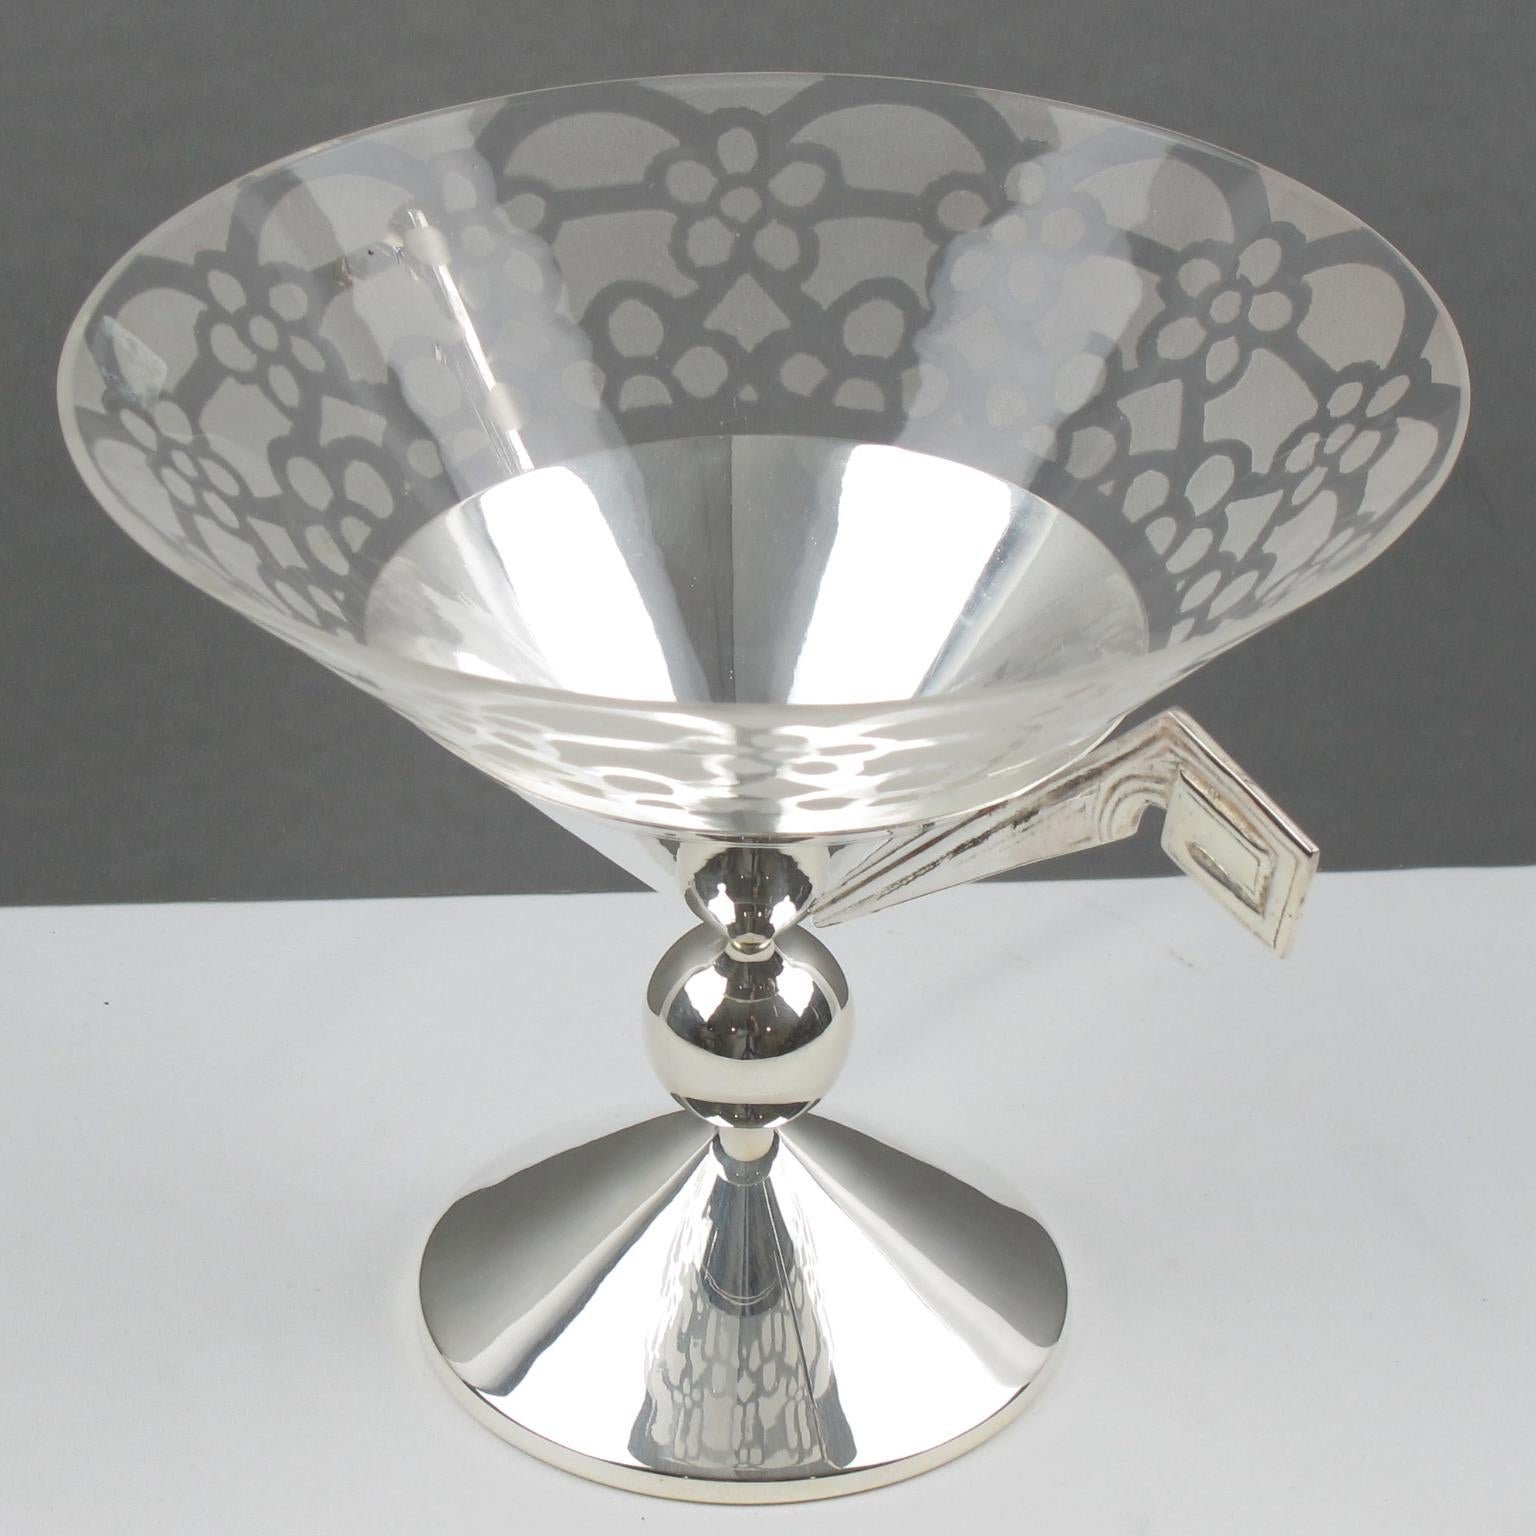 French Art Deco Silver Plate and Etched Glass Centerpiece Bowl, France 1930s For Sale